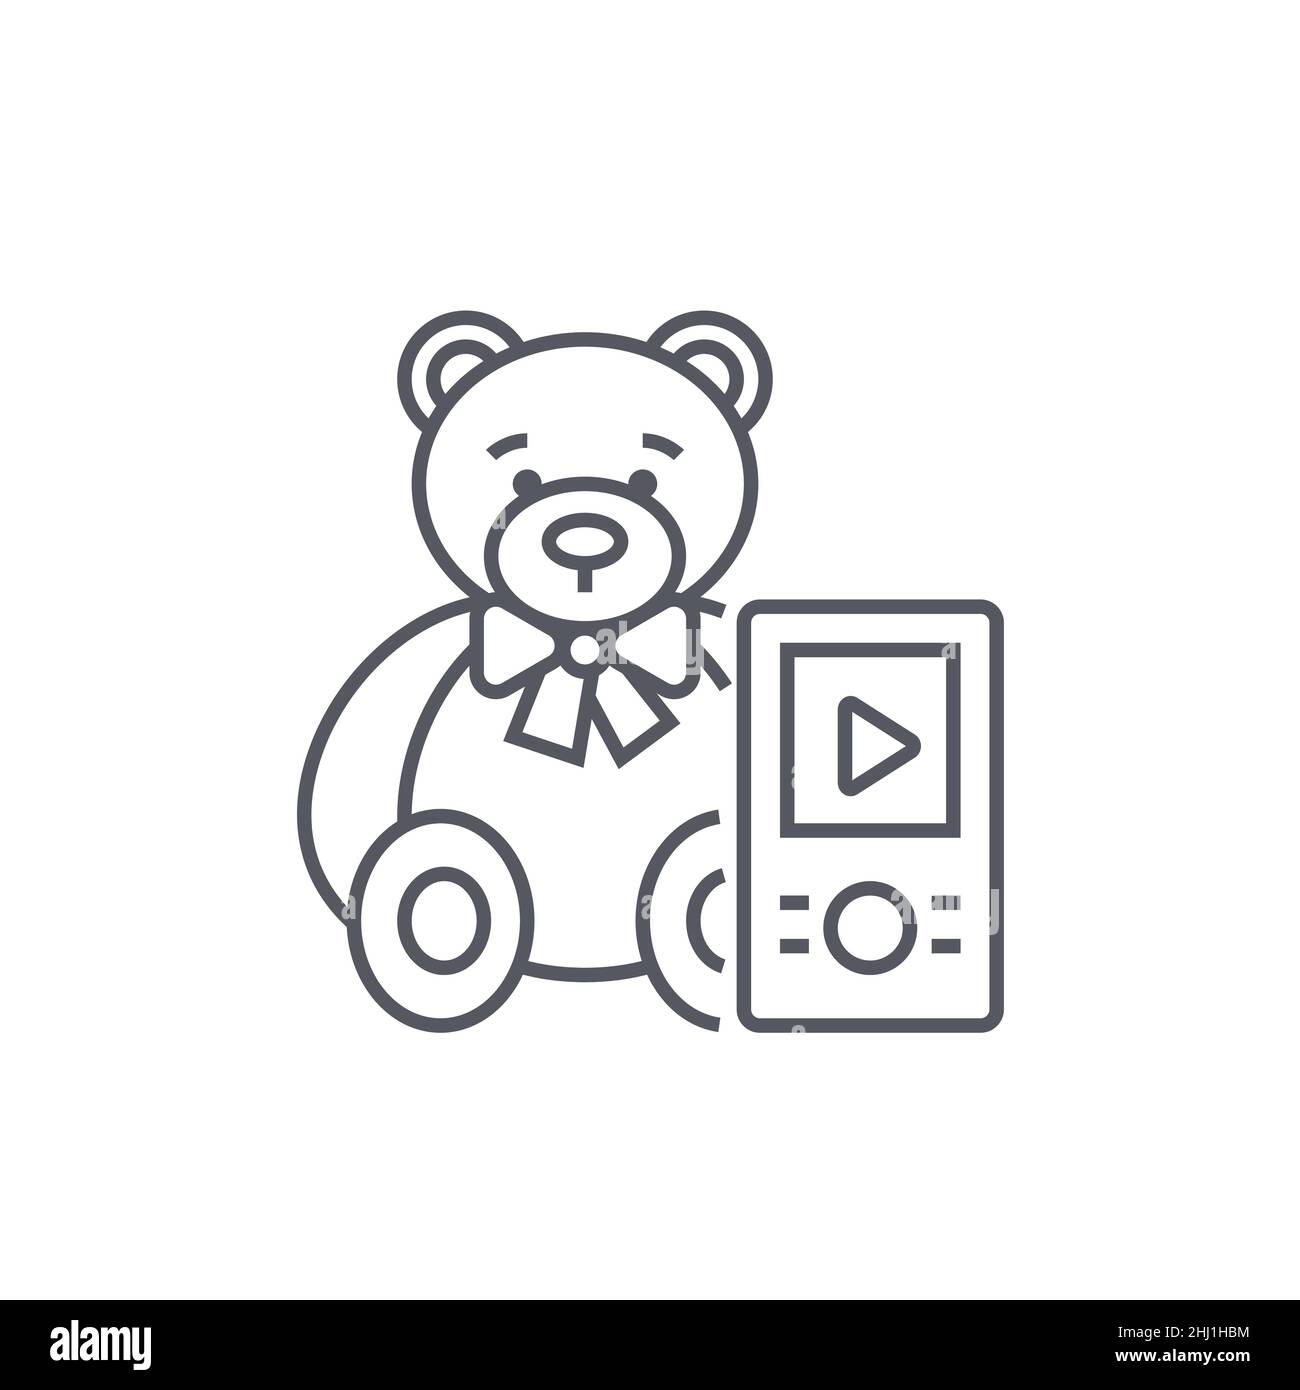 Audio fairy tales - modern black line design style icon on white background. Neat detailed image of cute teddy bear next to pocket audio player making Stock Vector